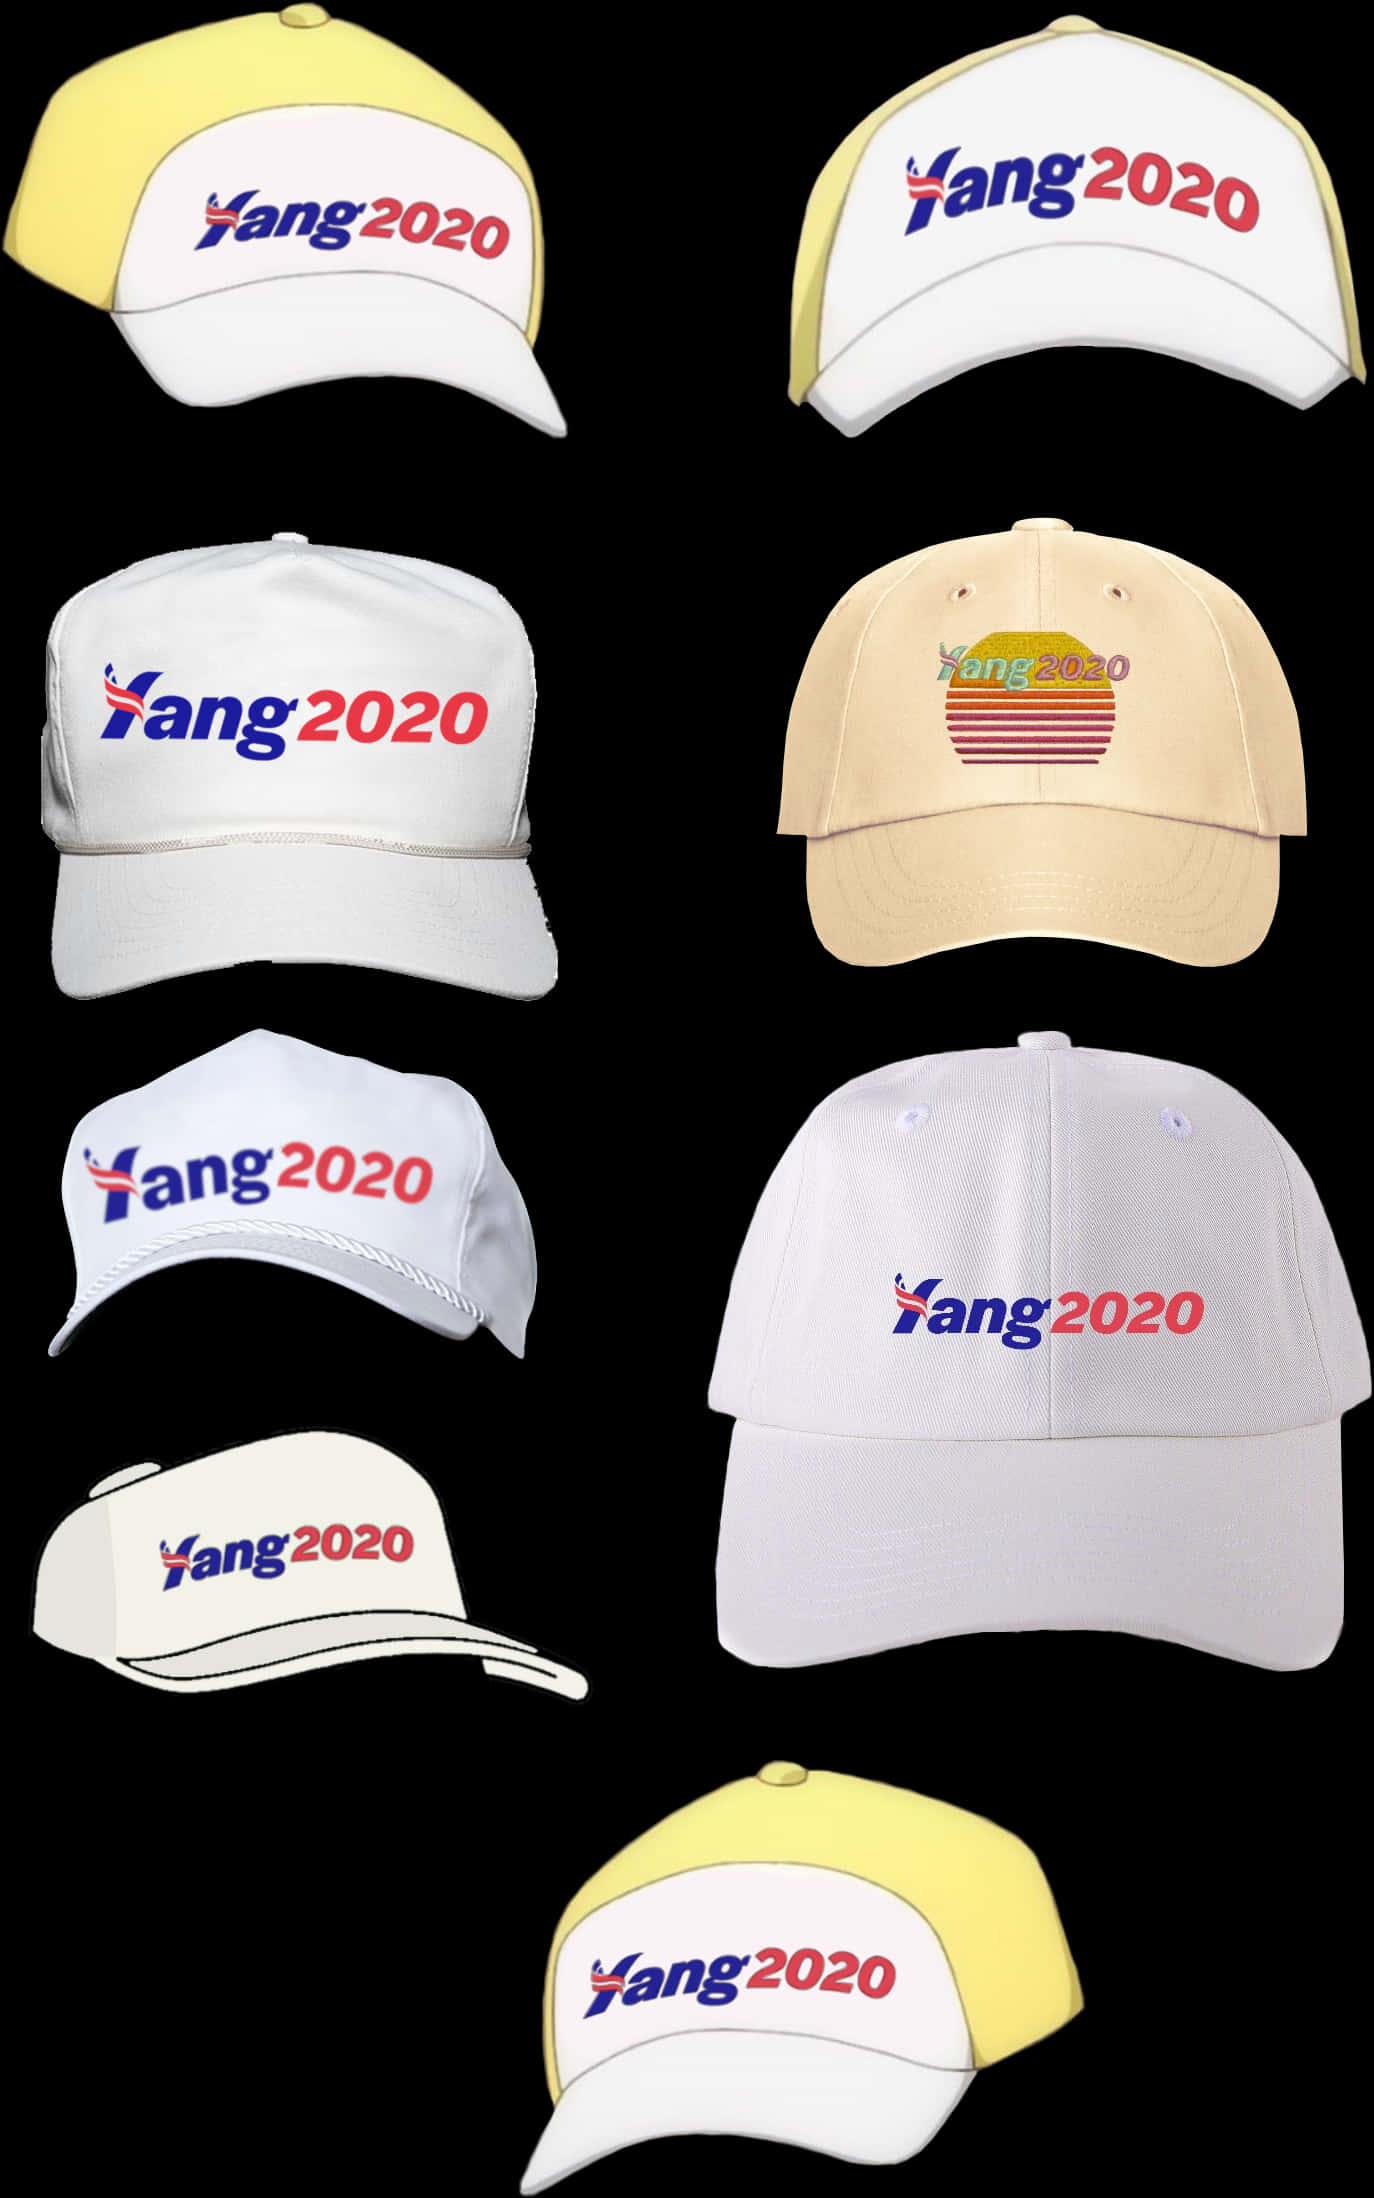 Yang2020 Campaign Hats Collection